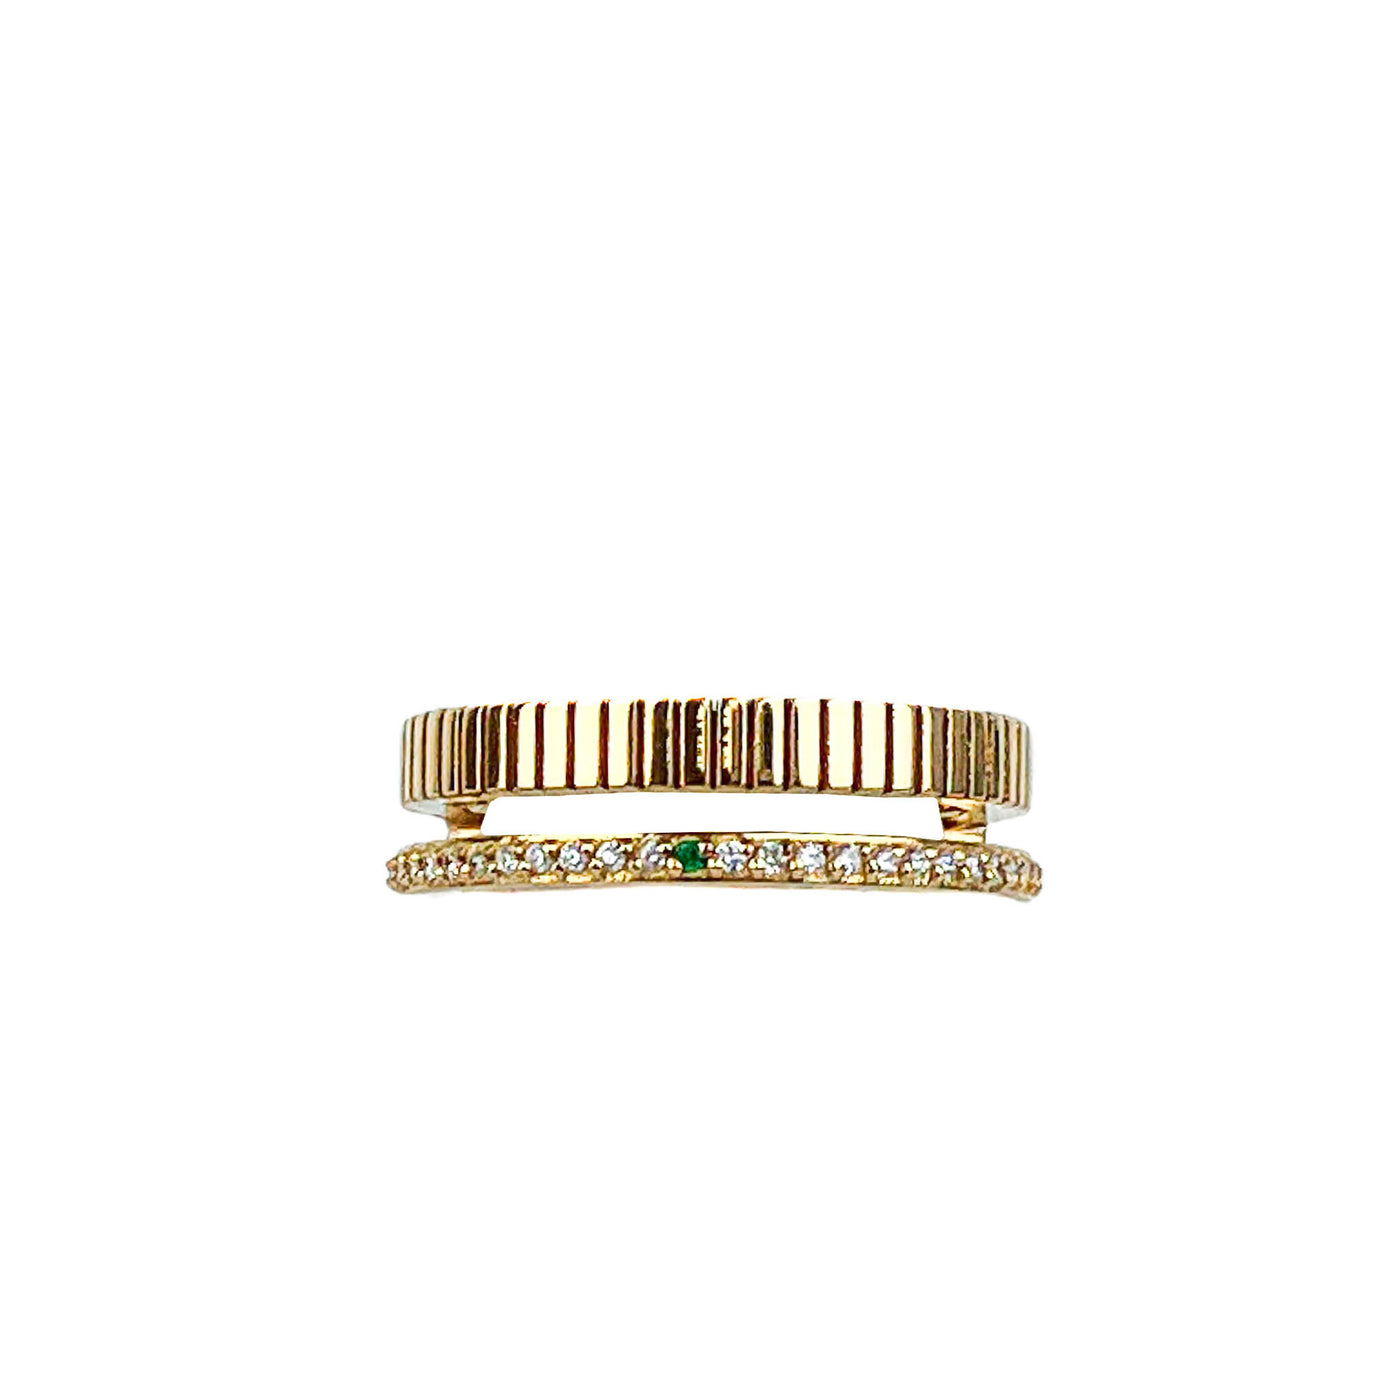 IVI Thin Slot Ring with Diamonds in Gold - Discounts on IVI at UAL